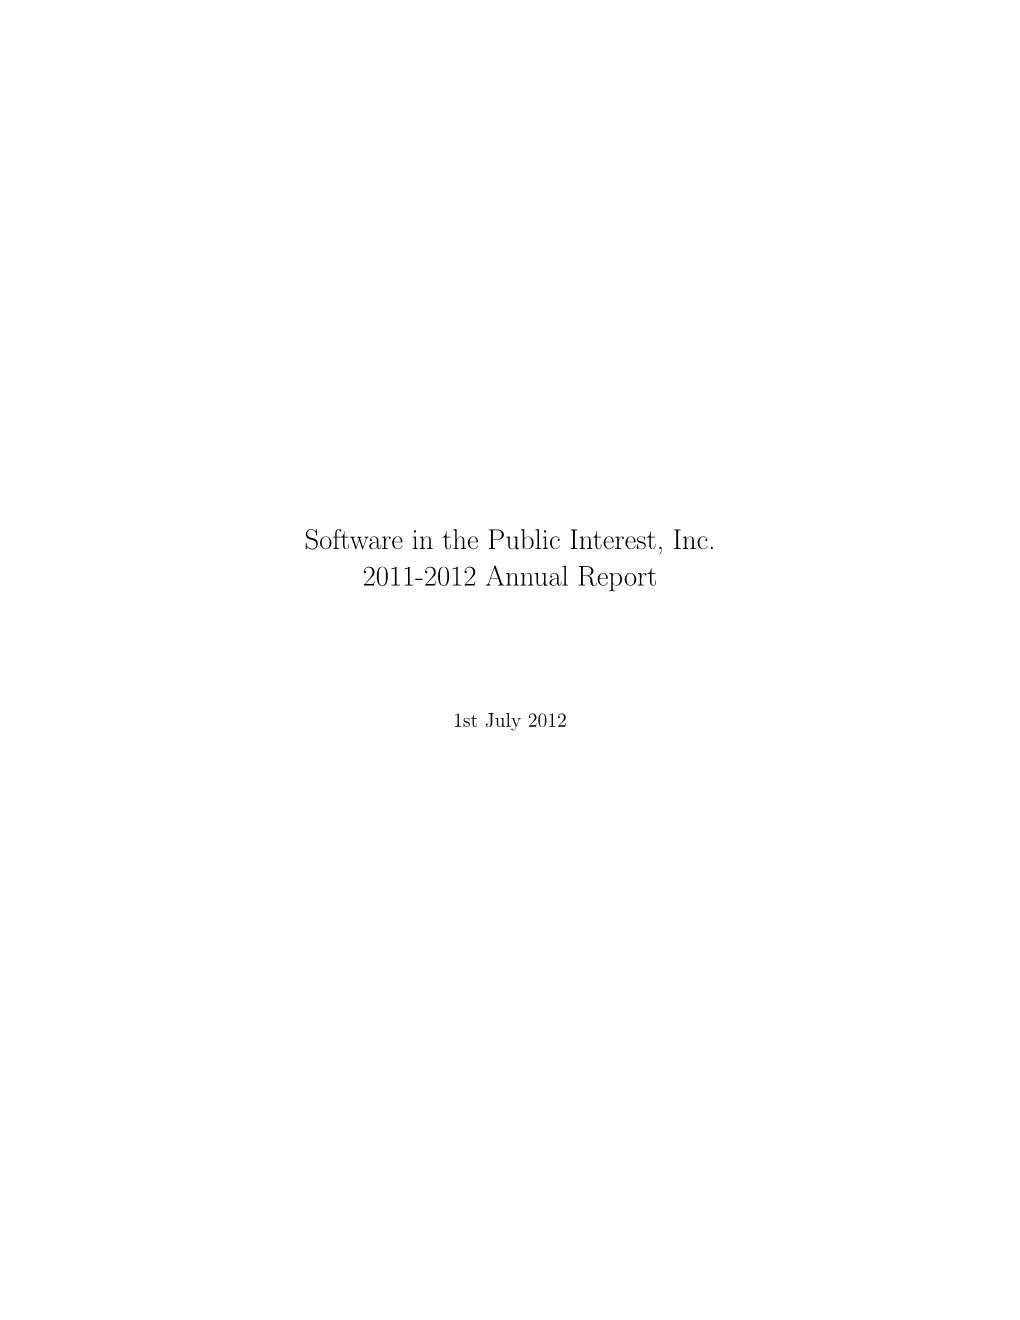 Software in the Public Interest, Inc. 2011-2012 Annual Report